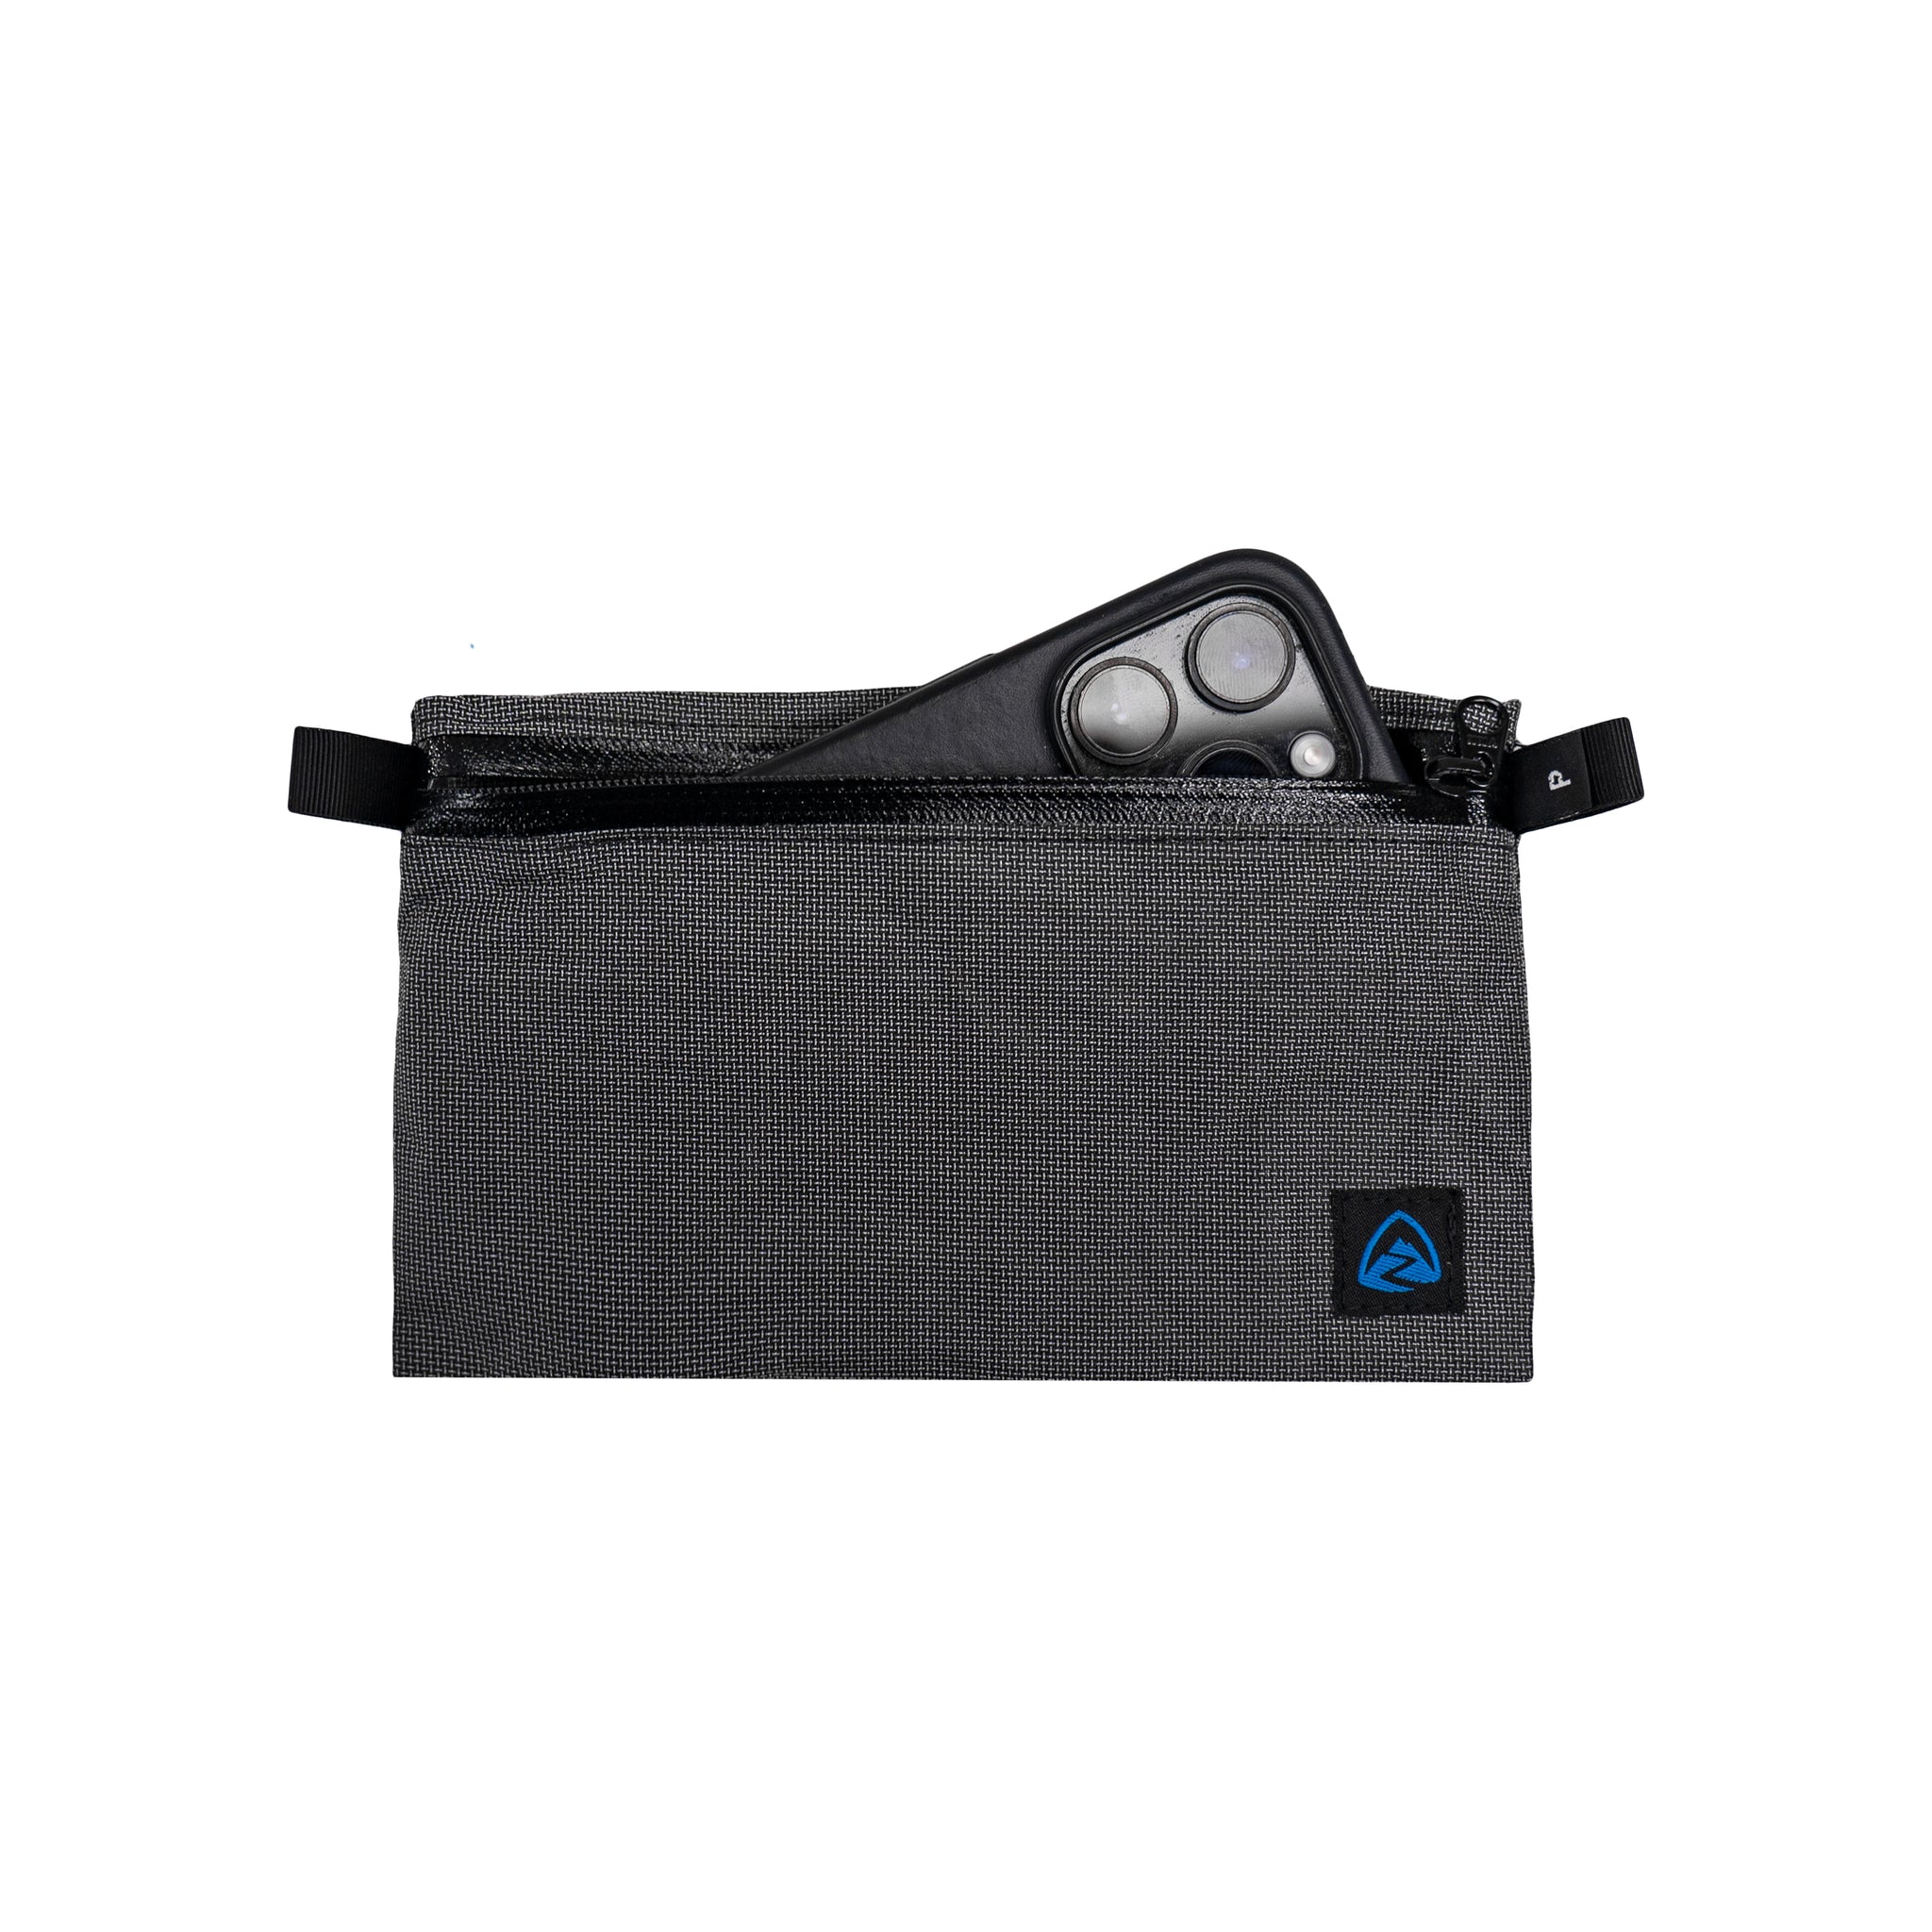 Ultralight Phone Zip Pouch | Lightest Universal Backpack Hiking